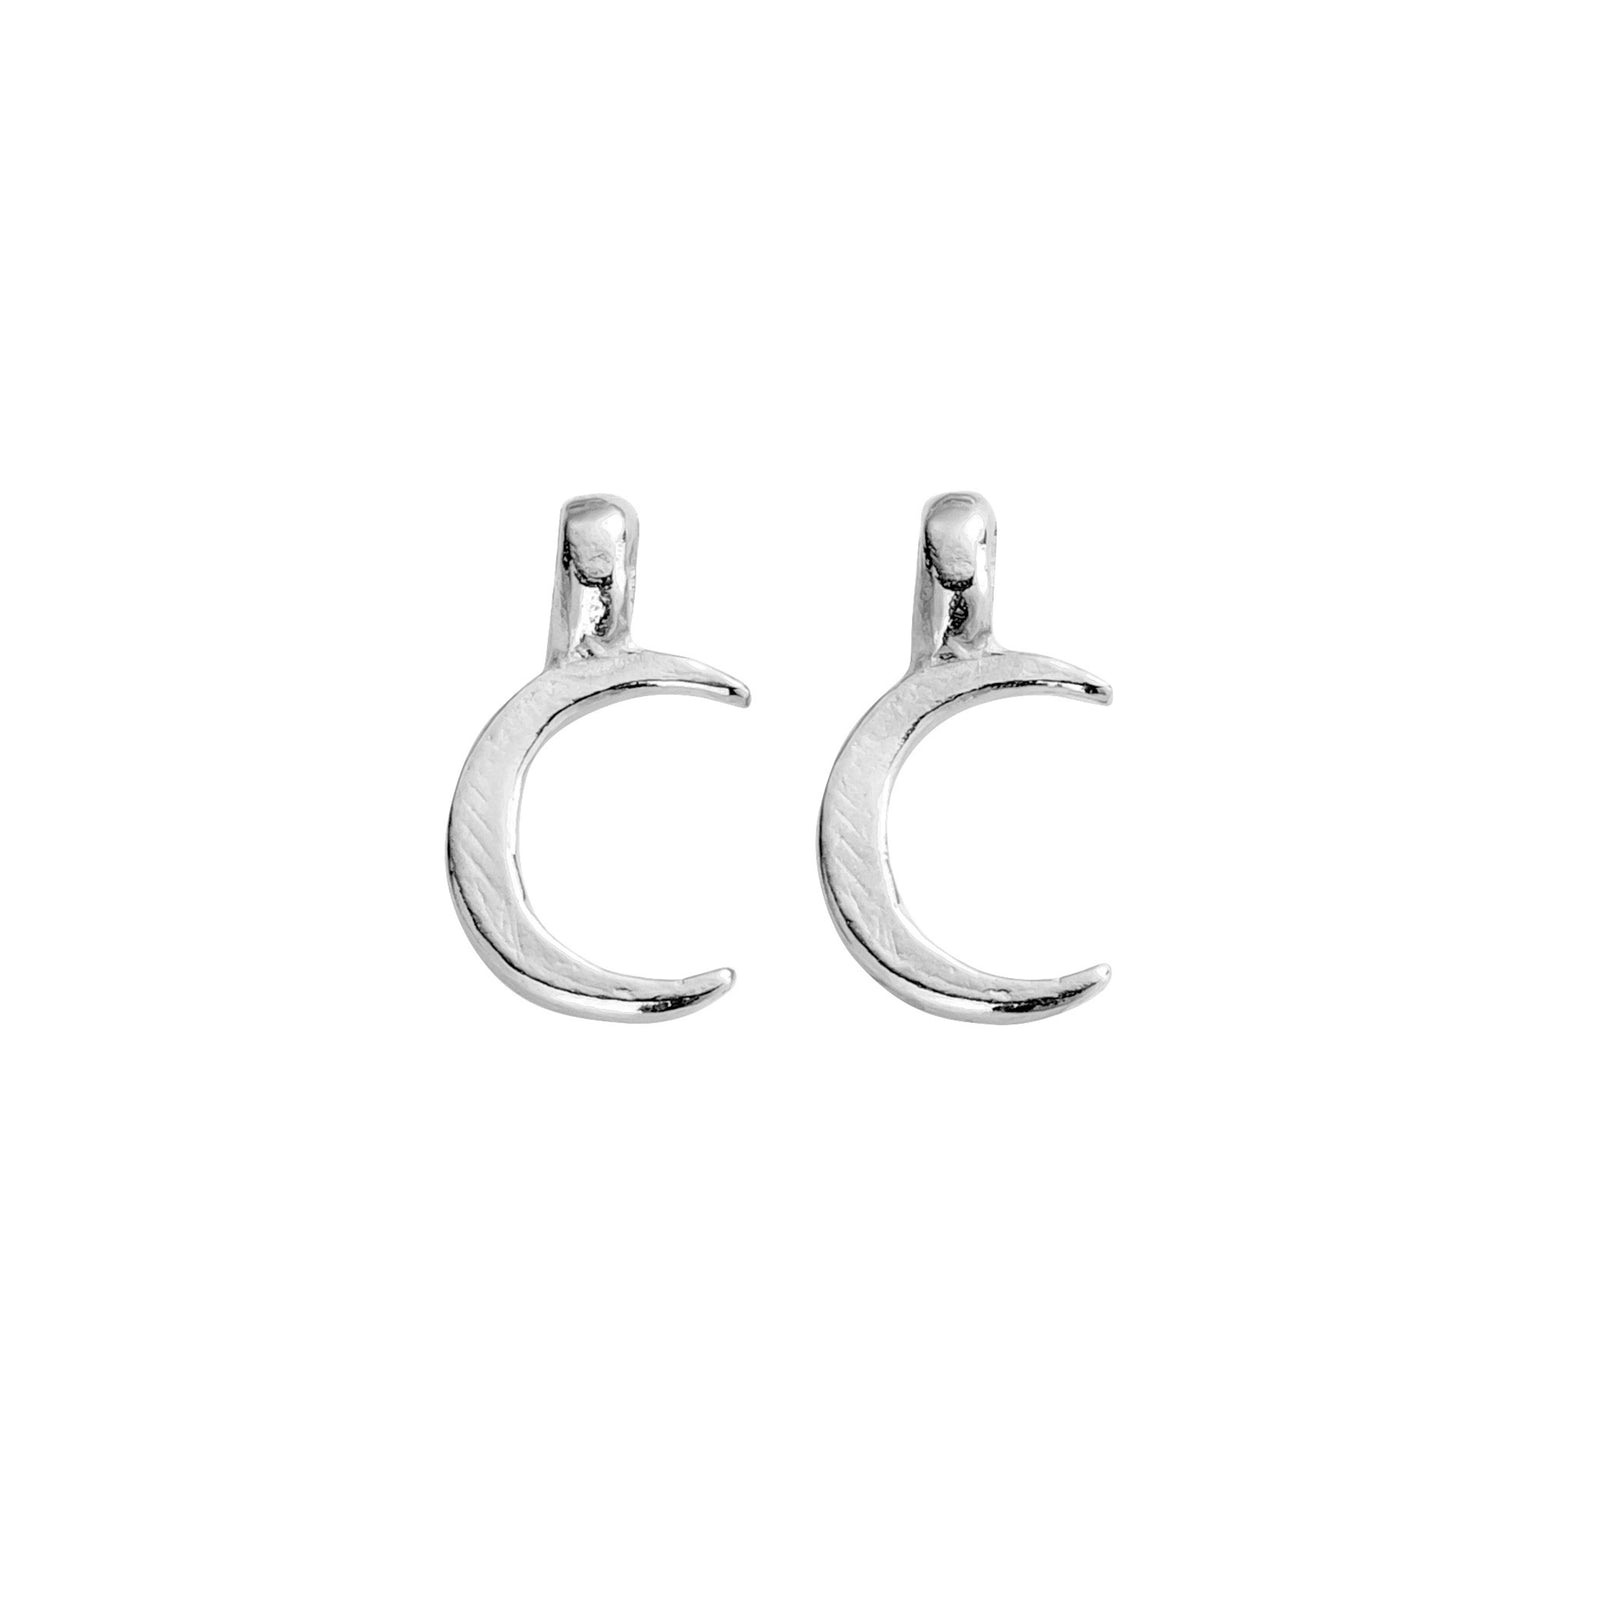 Silver Mini Crescent Moon Earring Charms